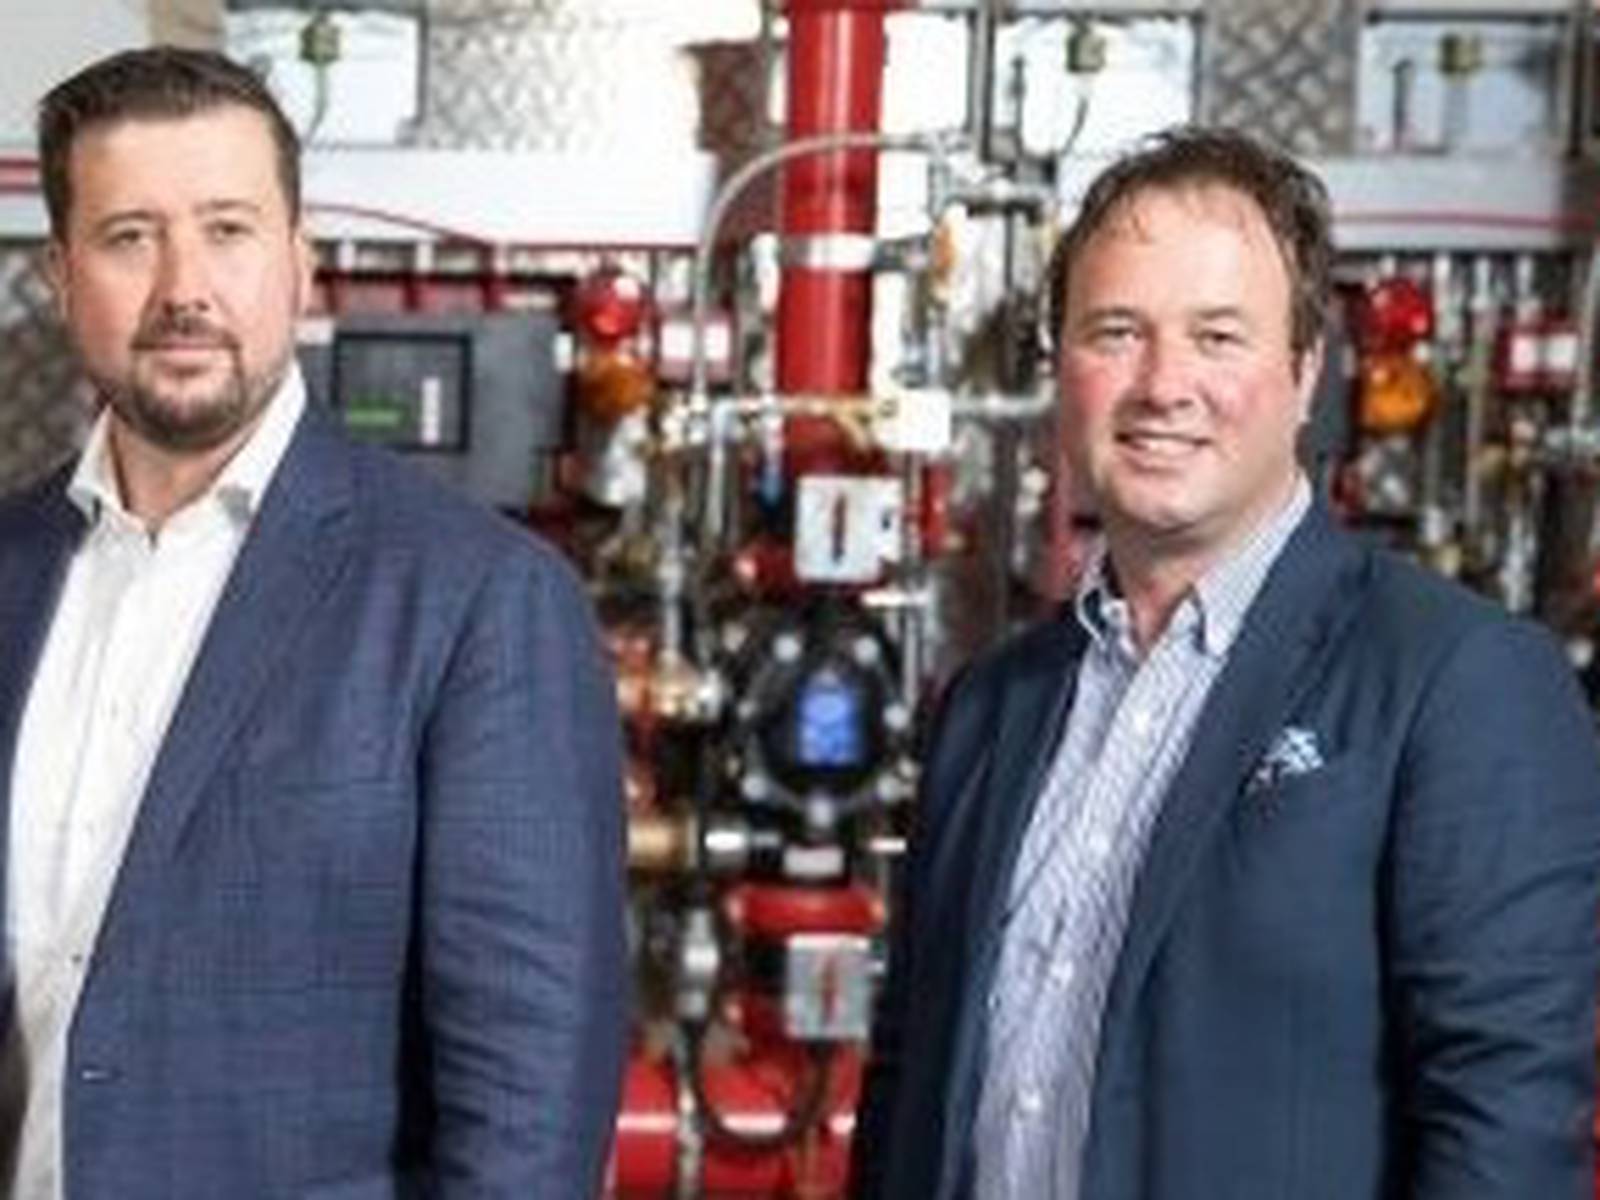 Waterland obtains majority stake in fire-safety firm Writech – The